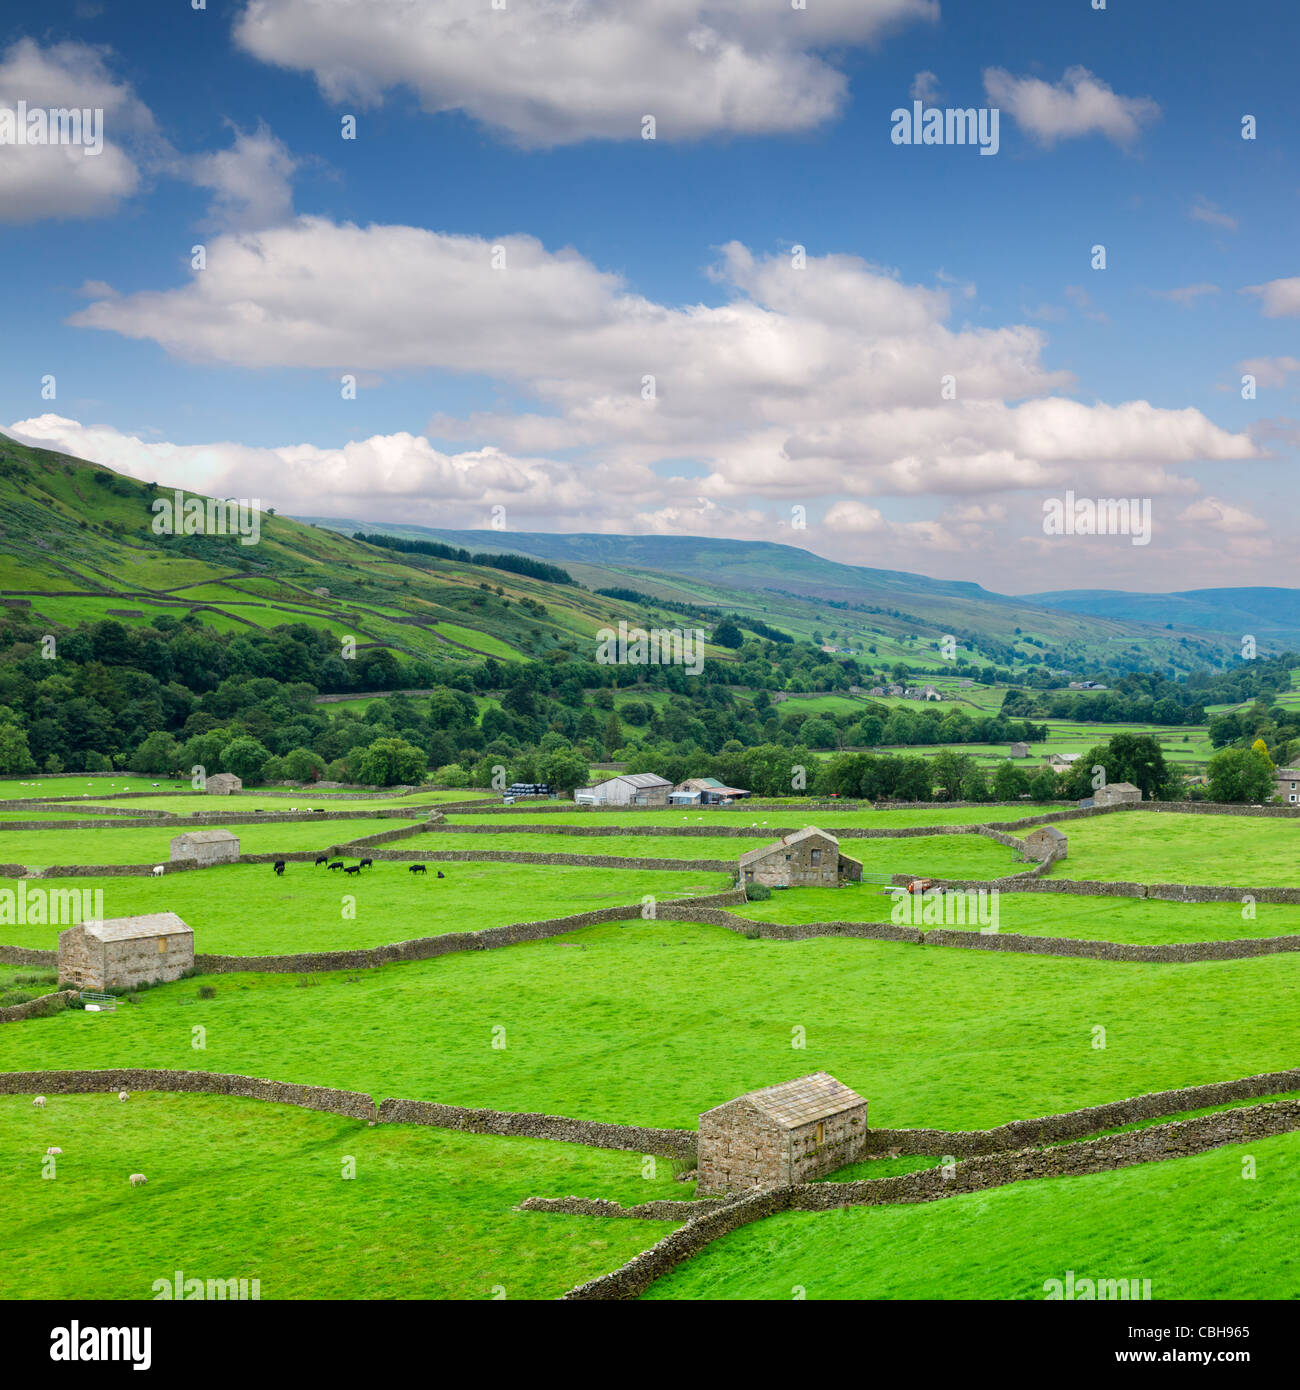 A peaceful scene in Swaledale, North Yorkshire, England, with farmland, barns and dry stone walls. Stock Photo